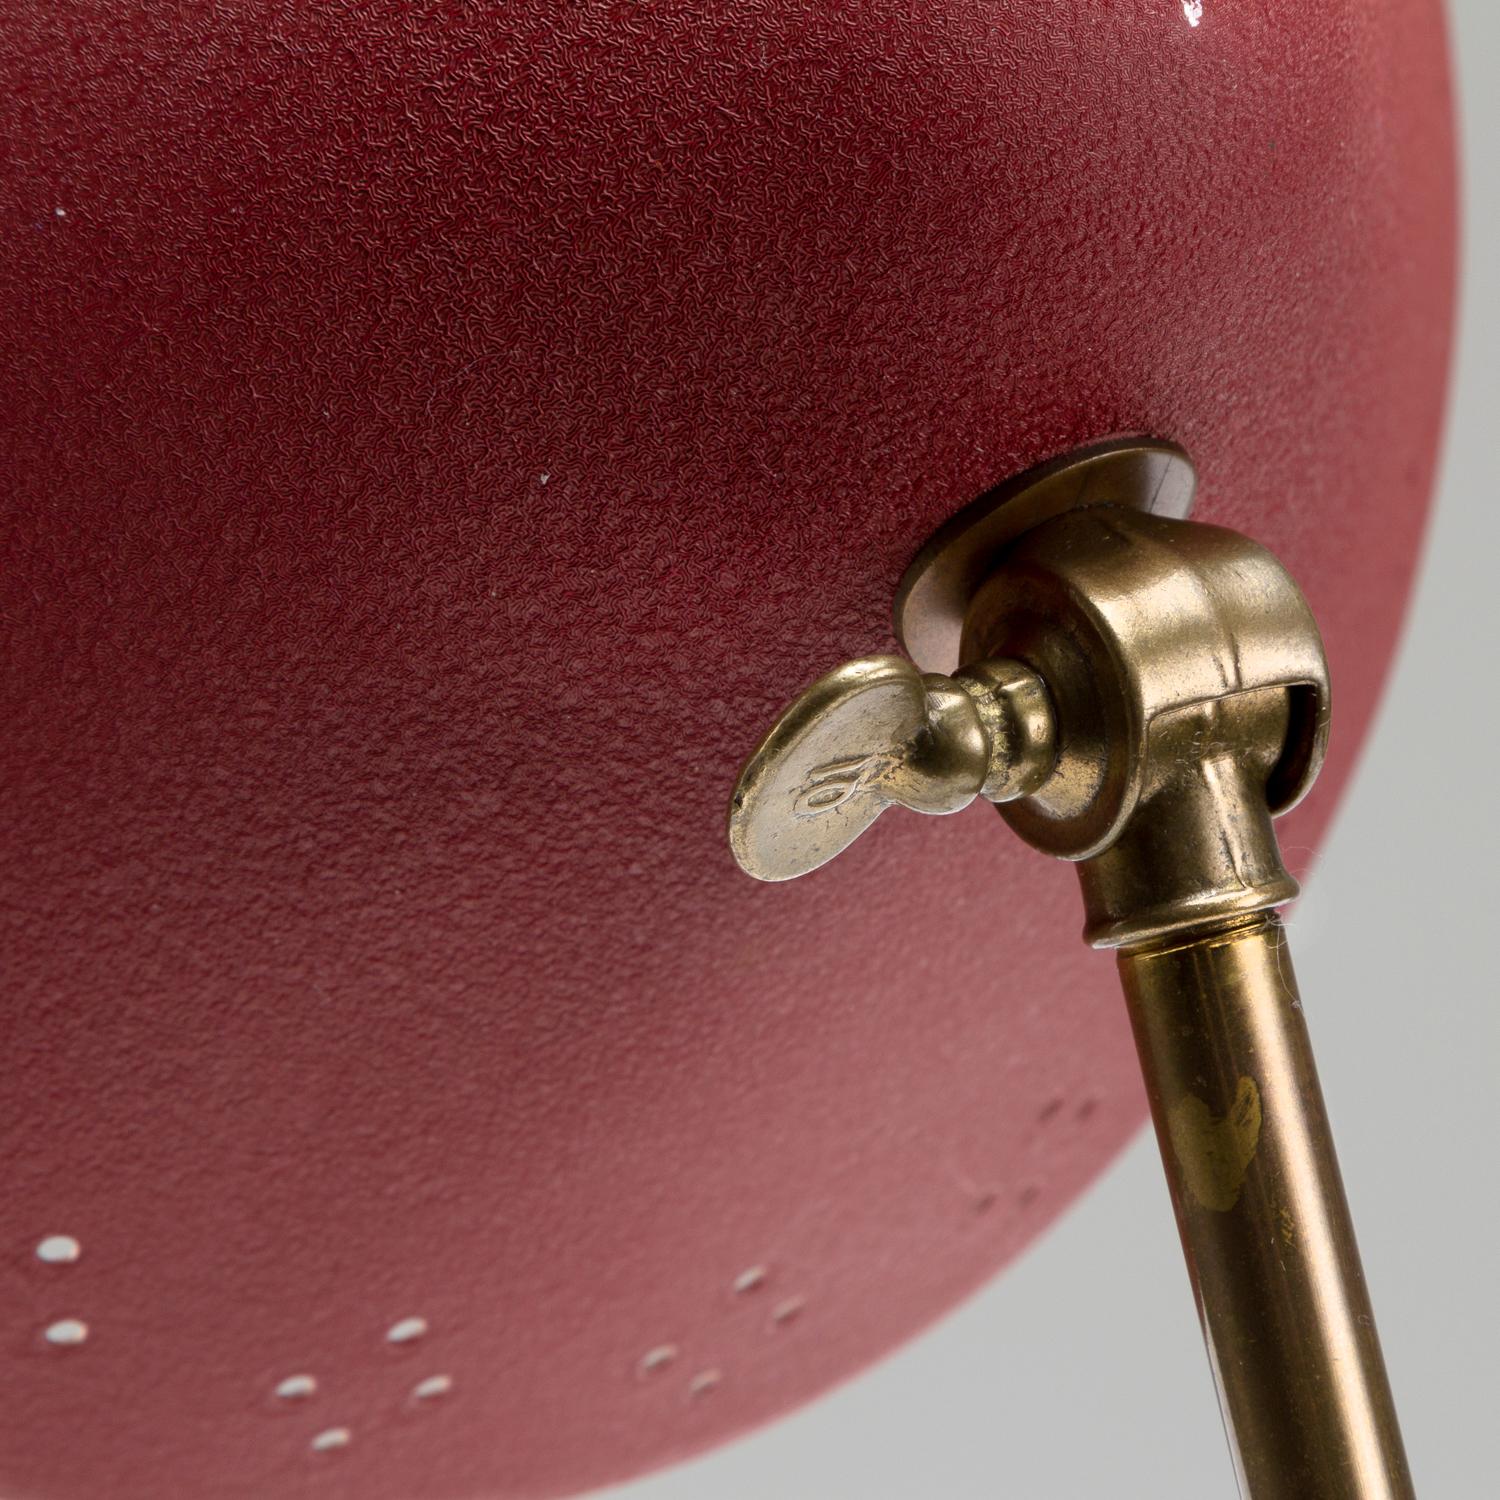 Red Lacquered Aluminium and Brass Table Lamp by Gnosjö Konstsmide, Sweden, 1950s For Sale 3